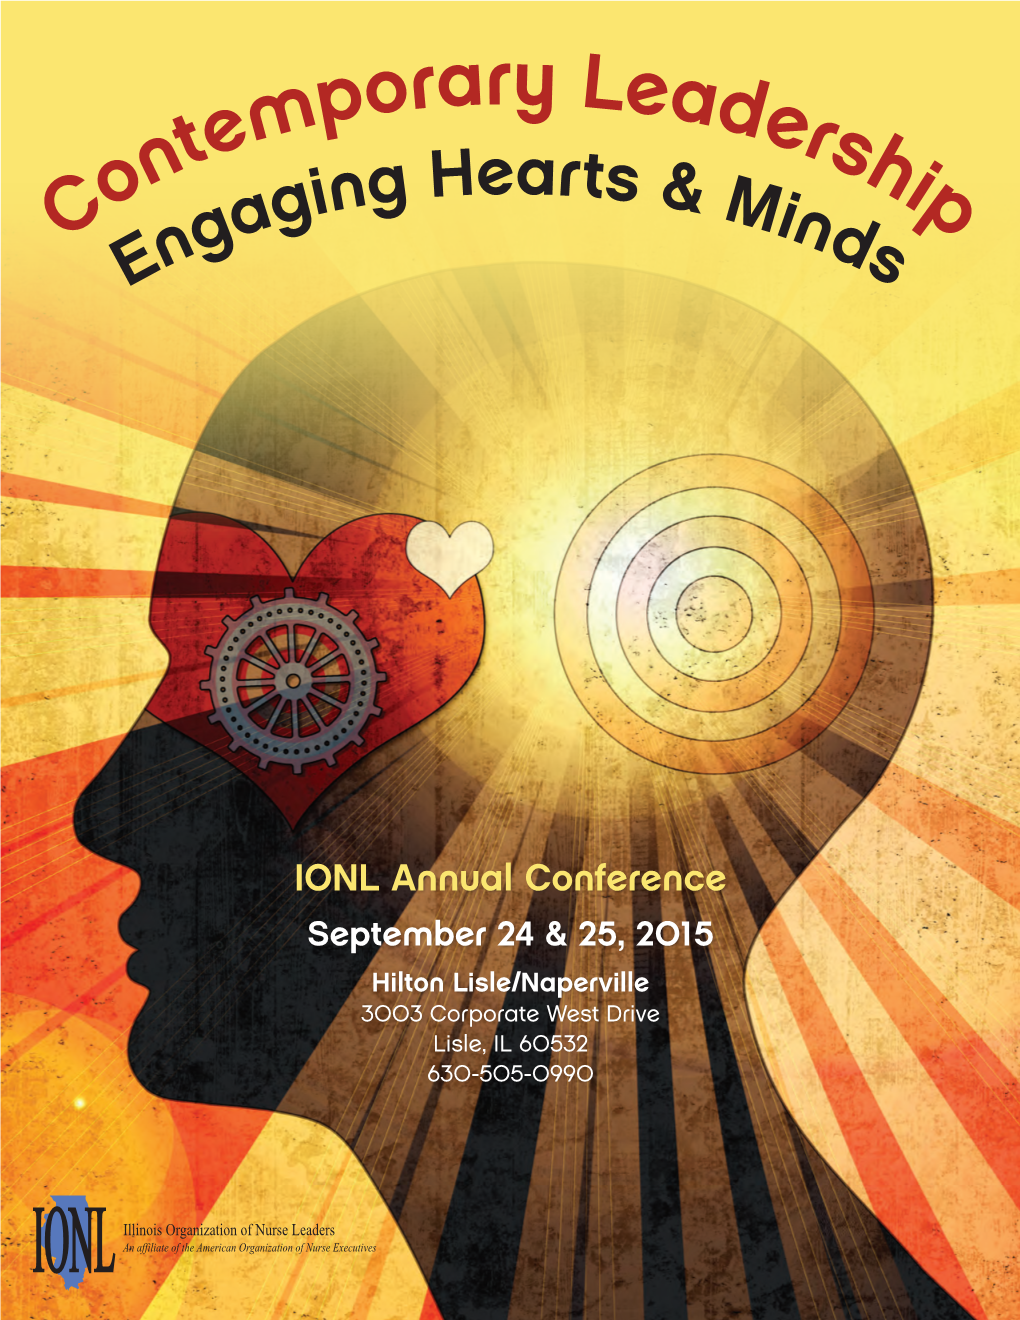 Contemporary Leadership‐ Engaging Hearts and Minds”